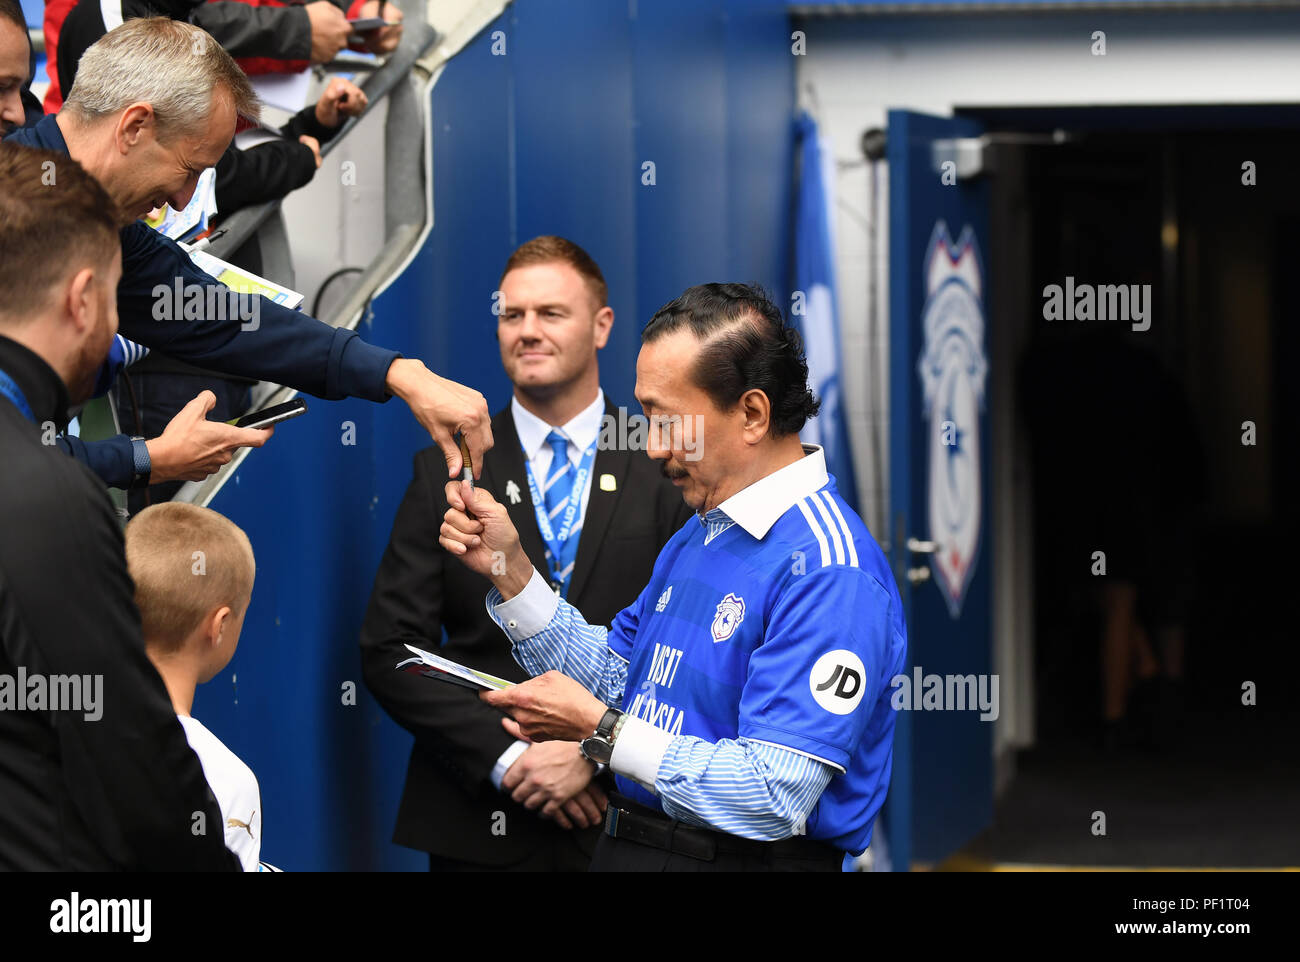 Cardiff City Owner Vincent Tan Signs Autographs Before The Premier League Match At The Cardiff City Stadium Stock Photo Alamy